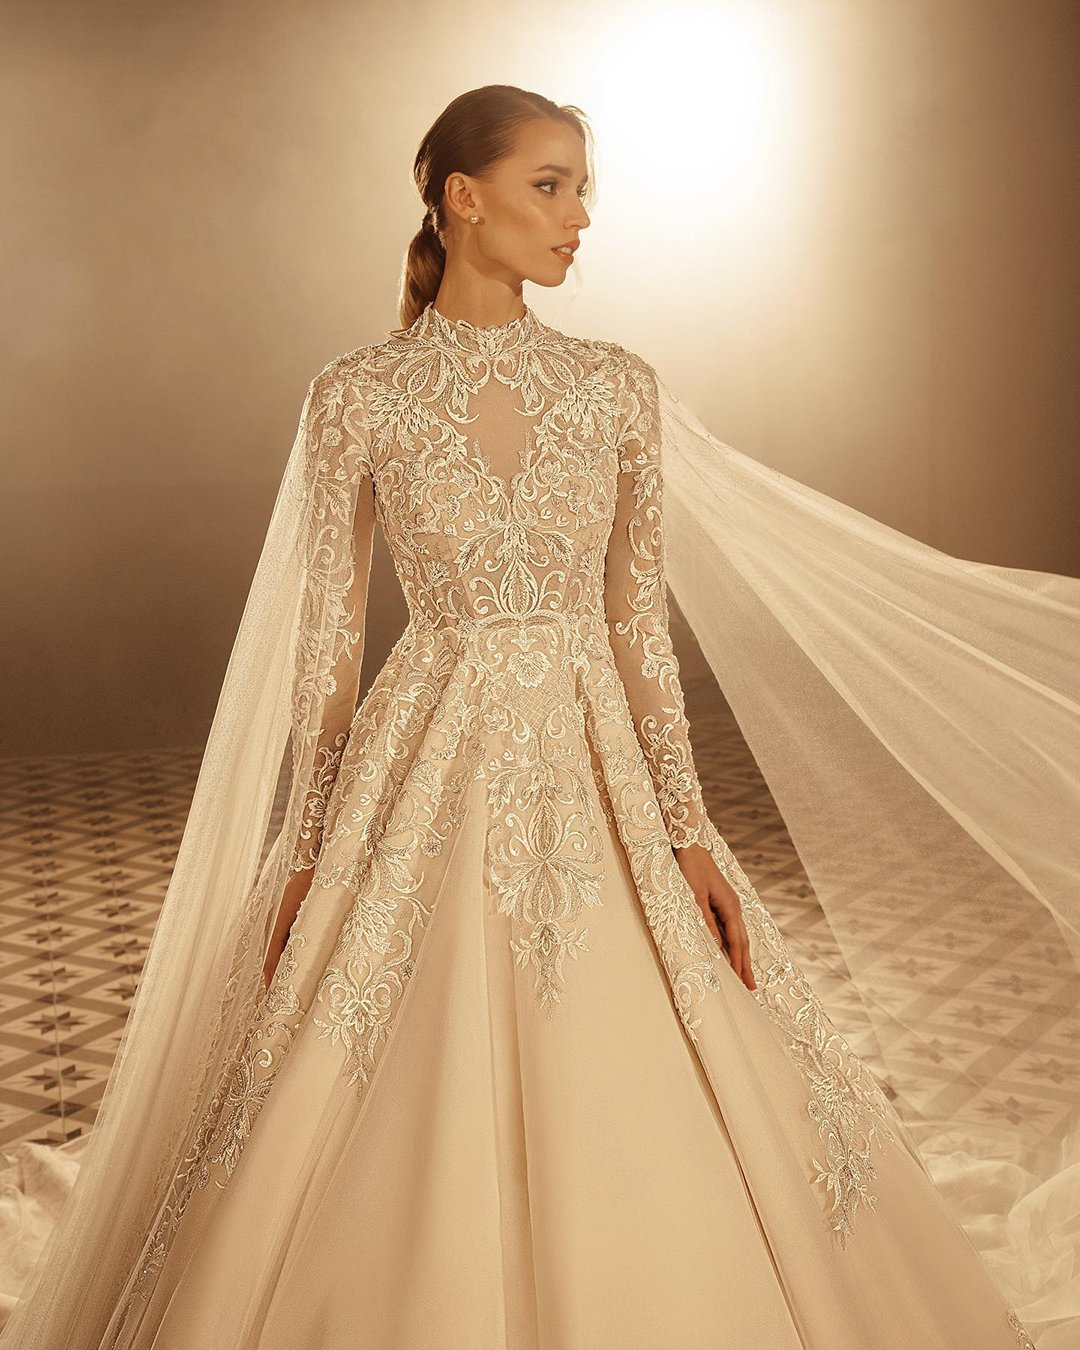 vintage inspired wedding dresses with long sleeves lace high neck innocentiadresses